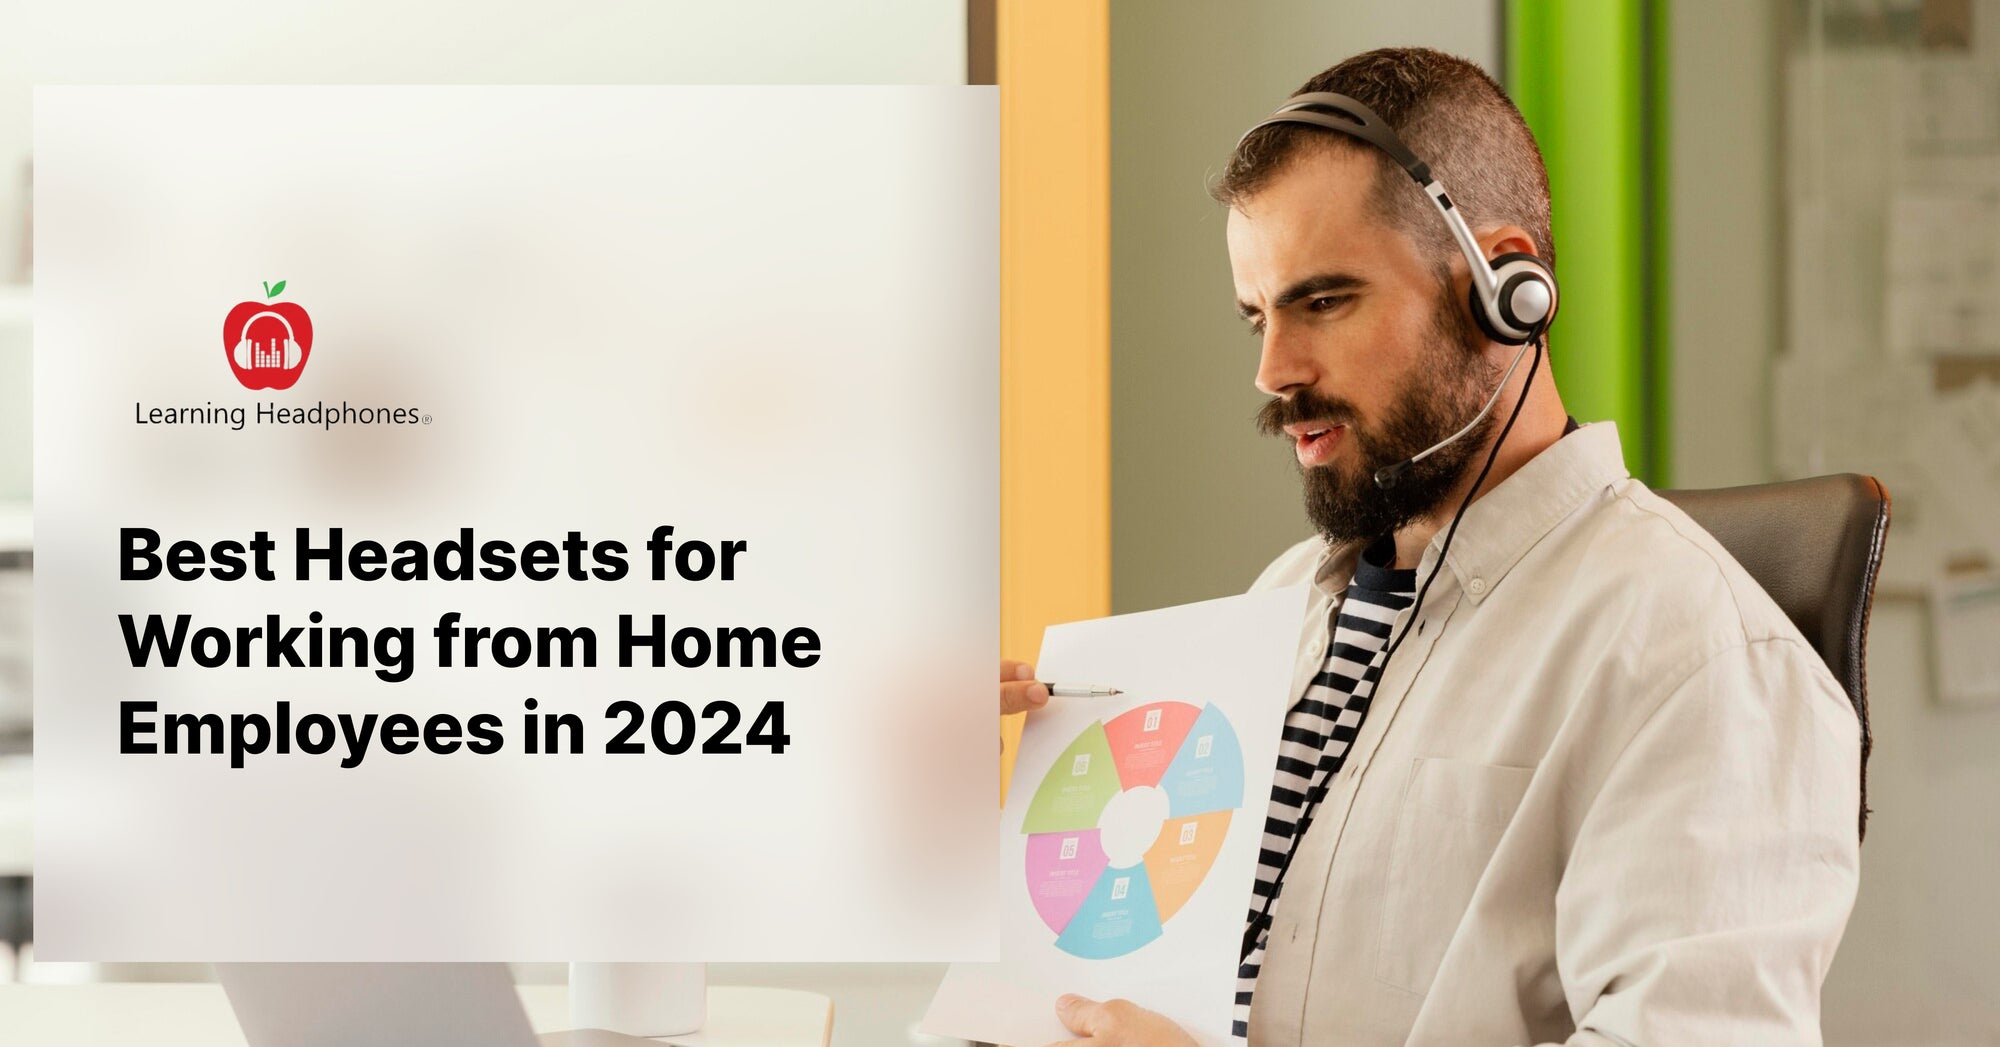 Best Headsets for Working from Home Employees in 2024